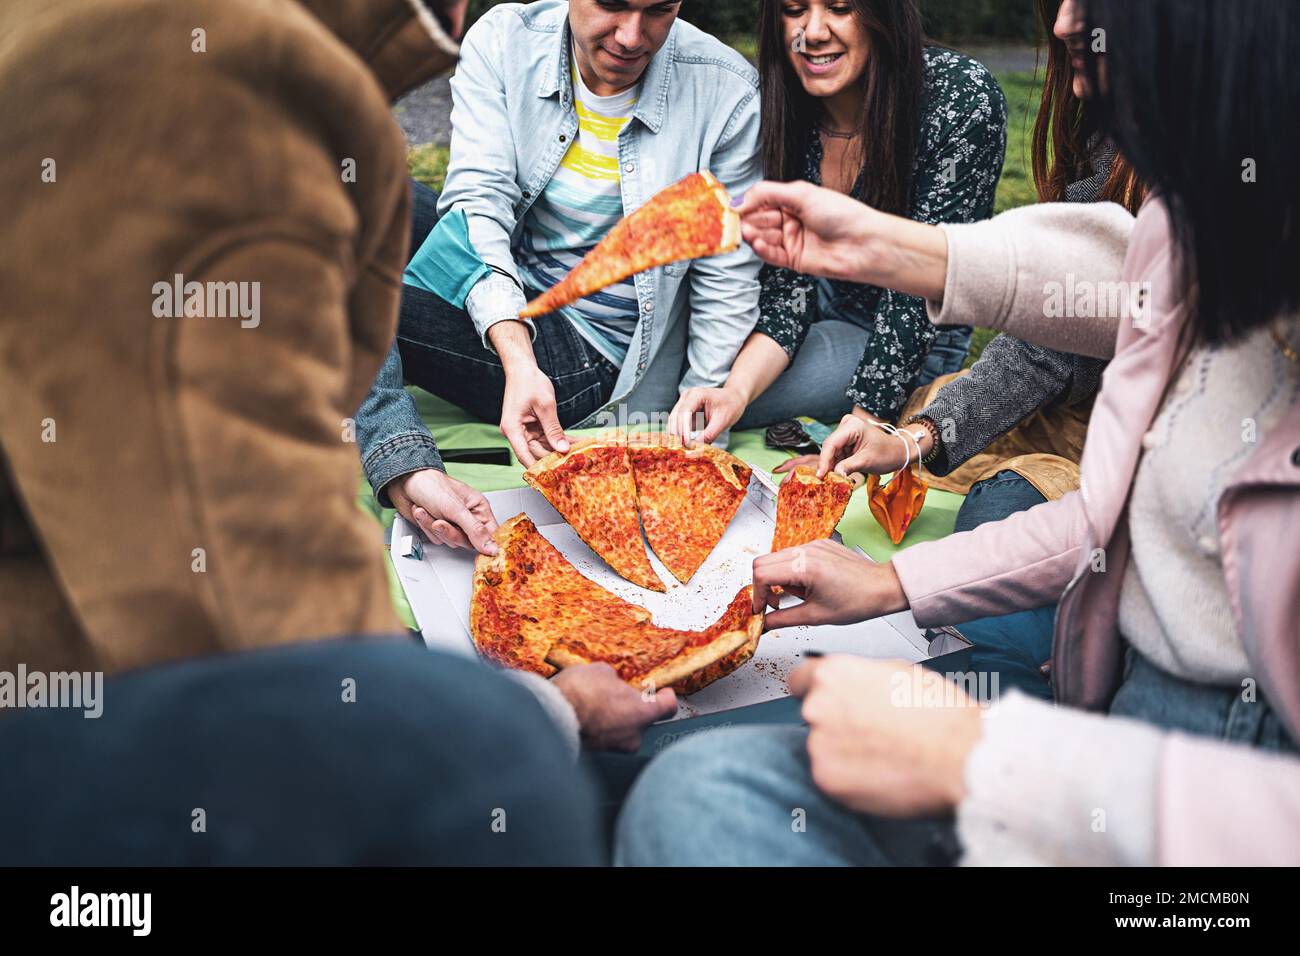 A group of friends sit on the grass and enjoy a large pizza together. The focus of the shot is a close-up of the pizza slices being held by the indivi Stock Photo